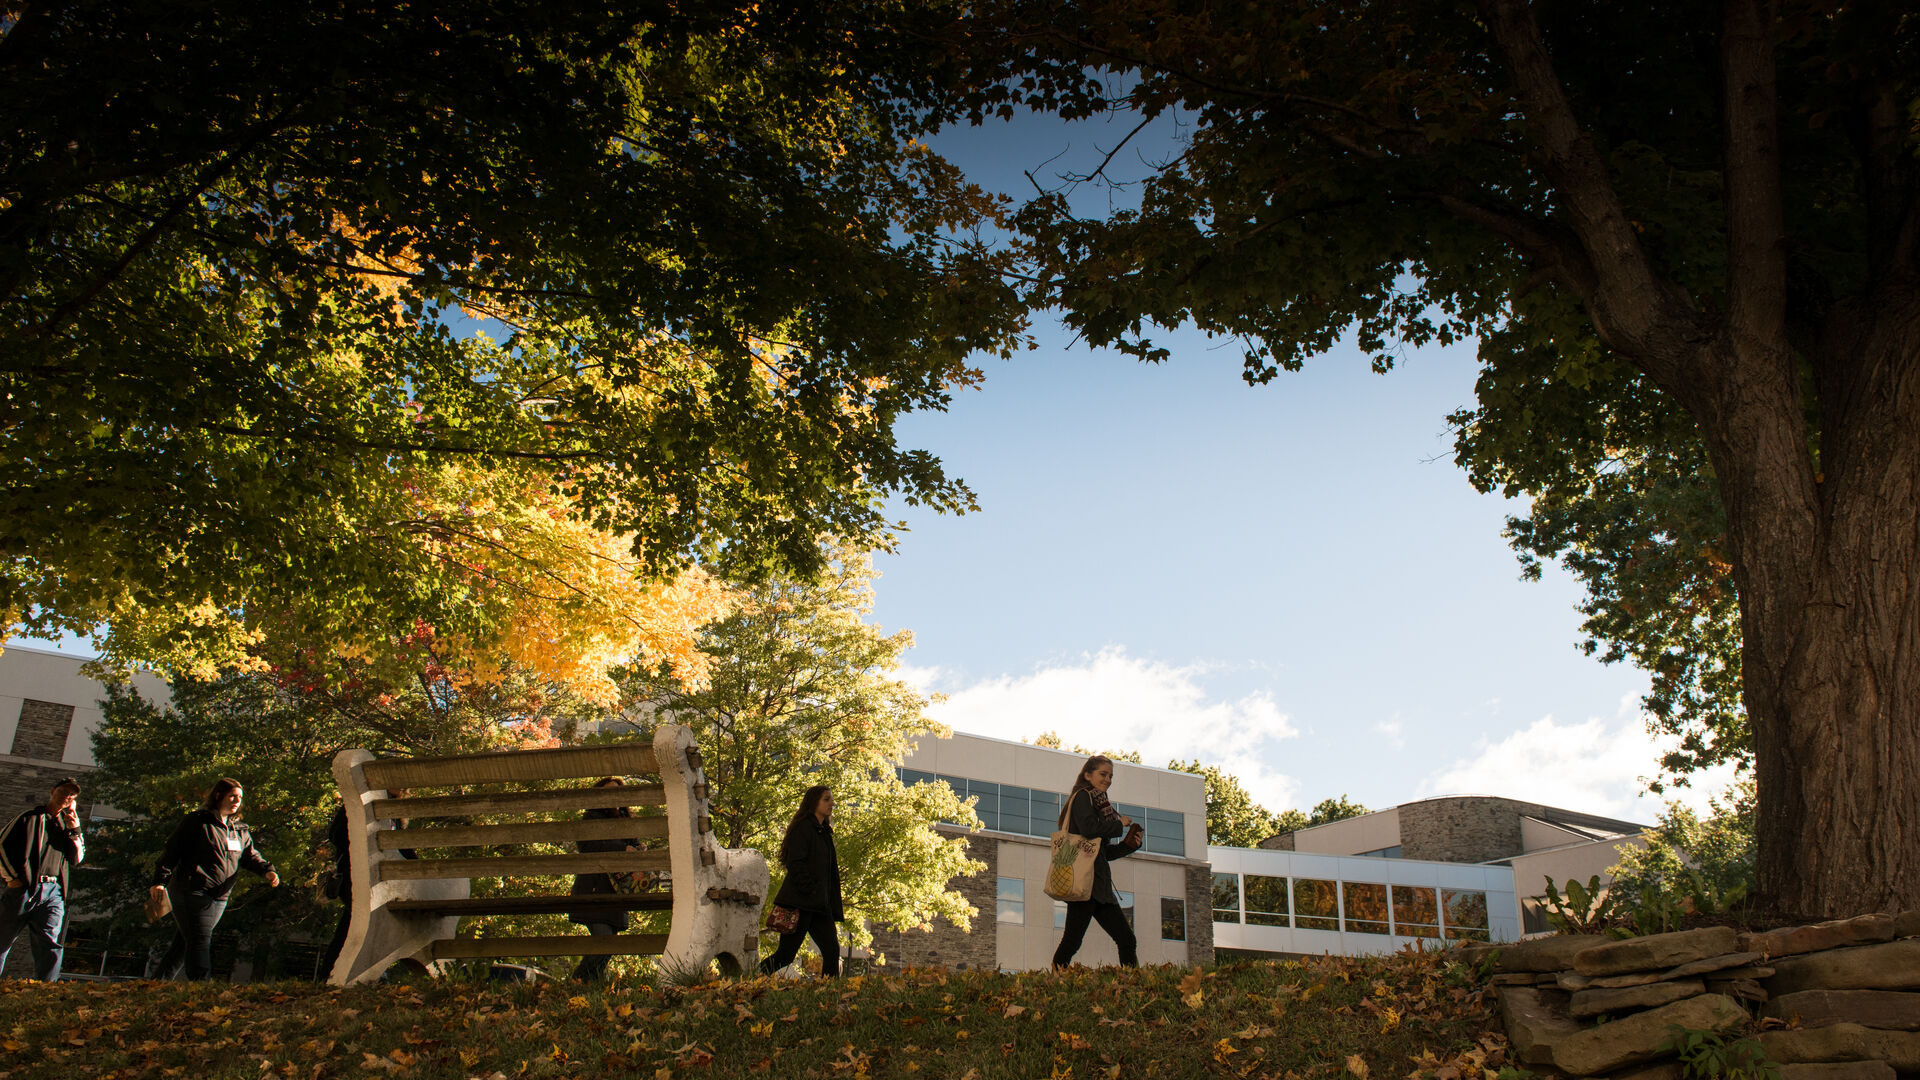 Students walking on the paths across campus on a beautiful fall day.